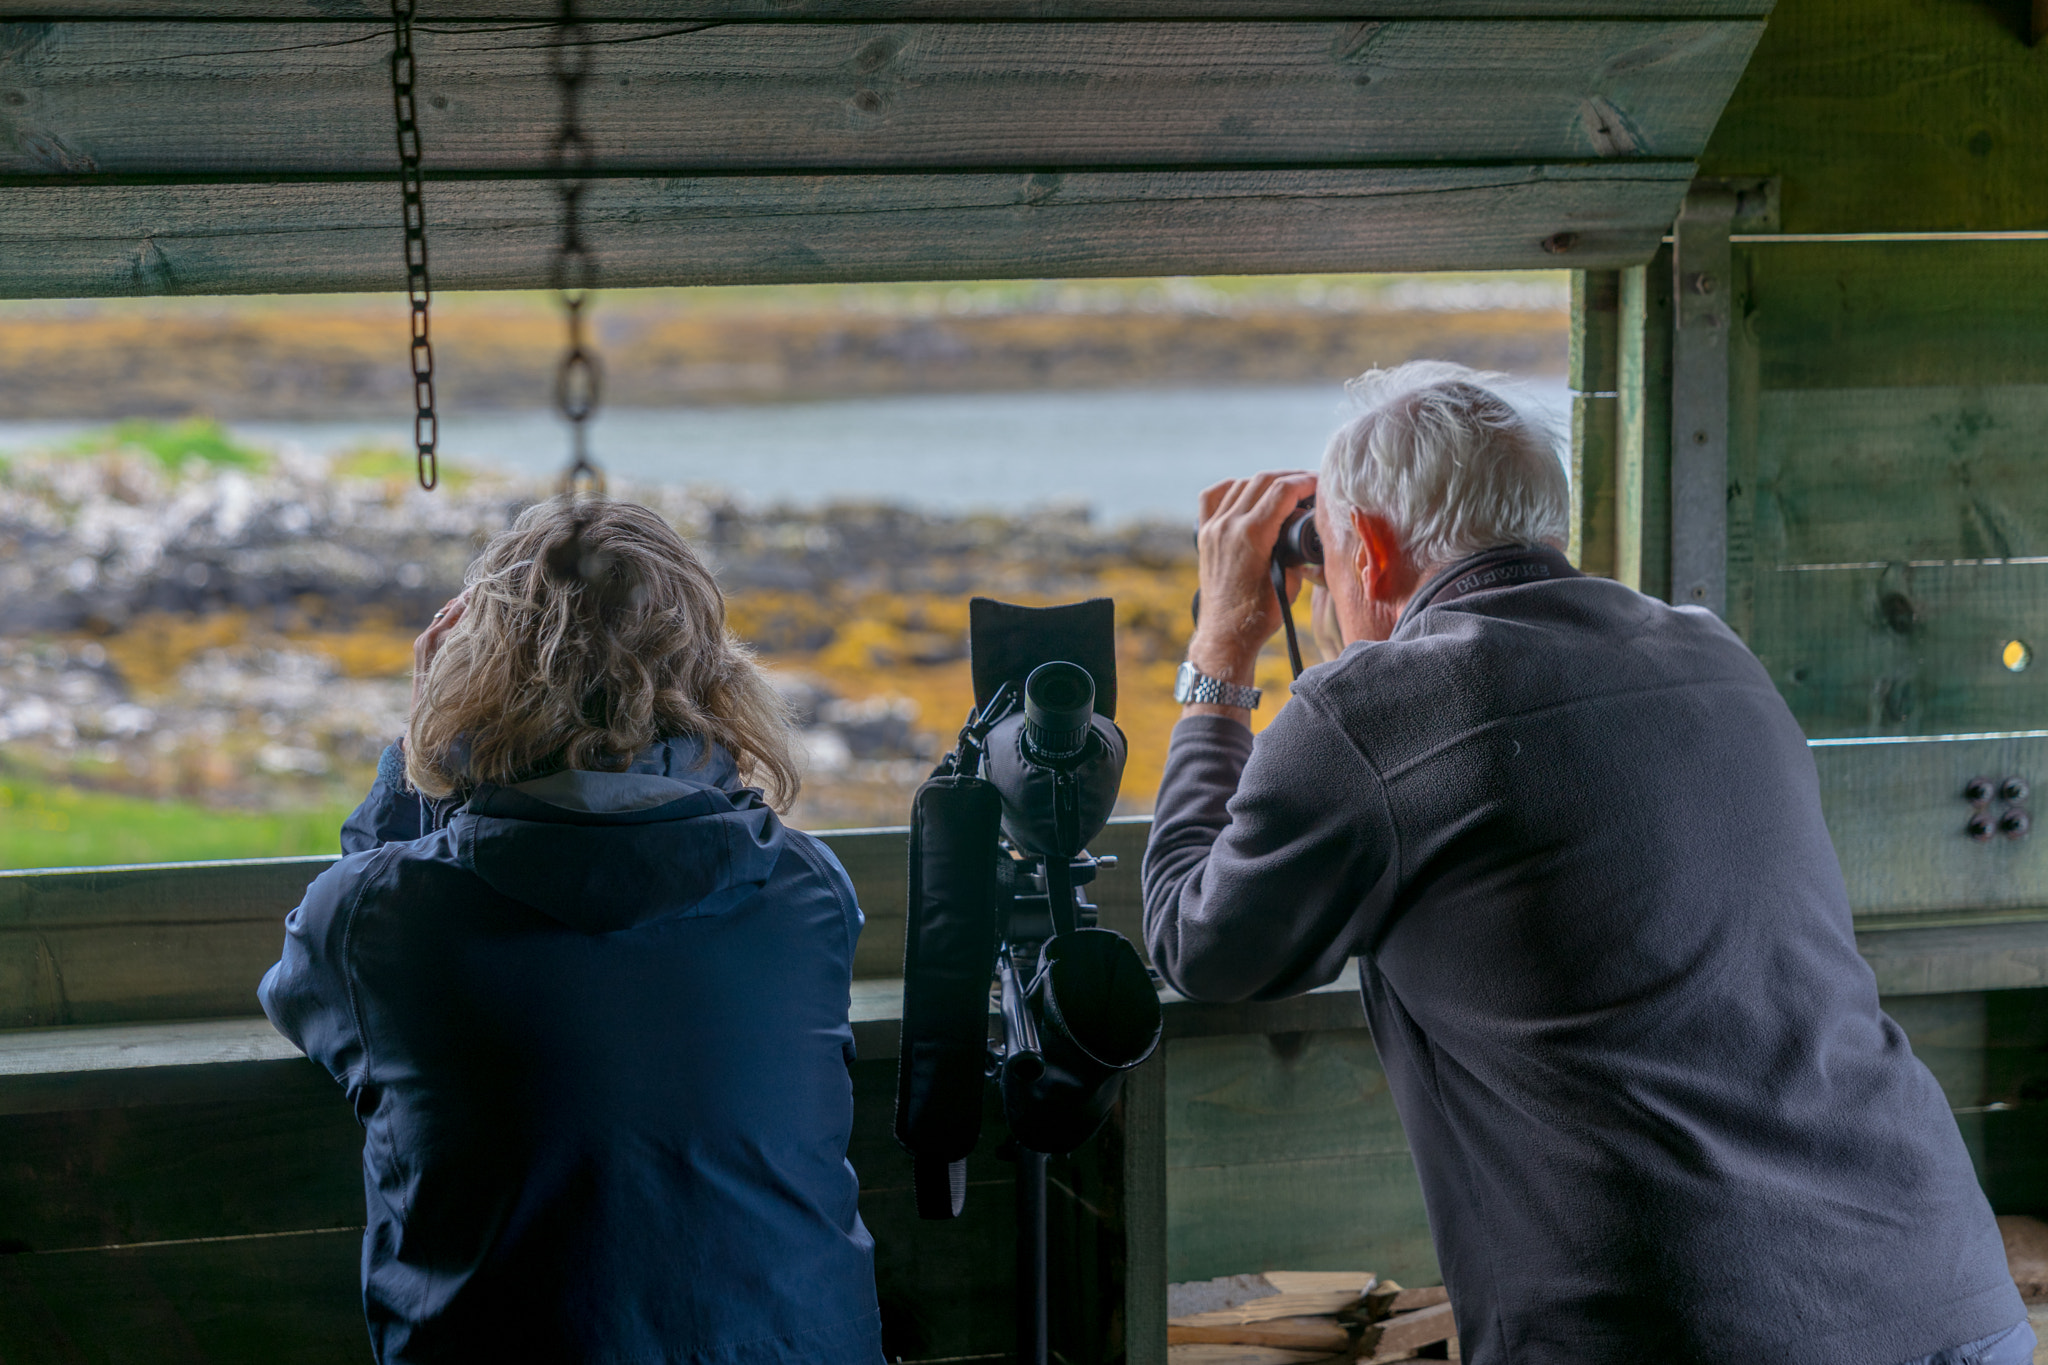 Sony a7 sample photo. Old people bird watching photography